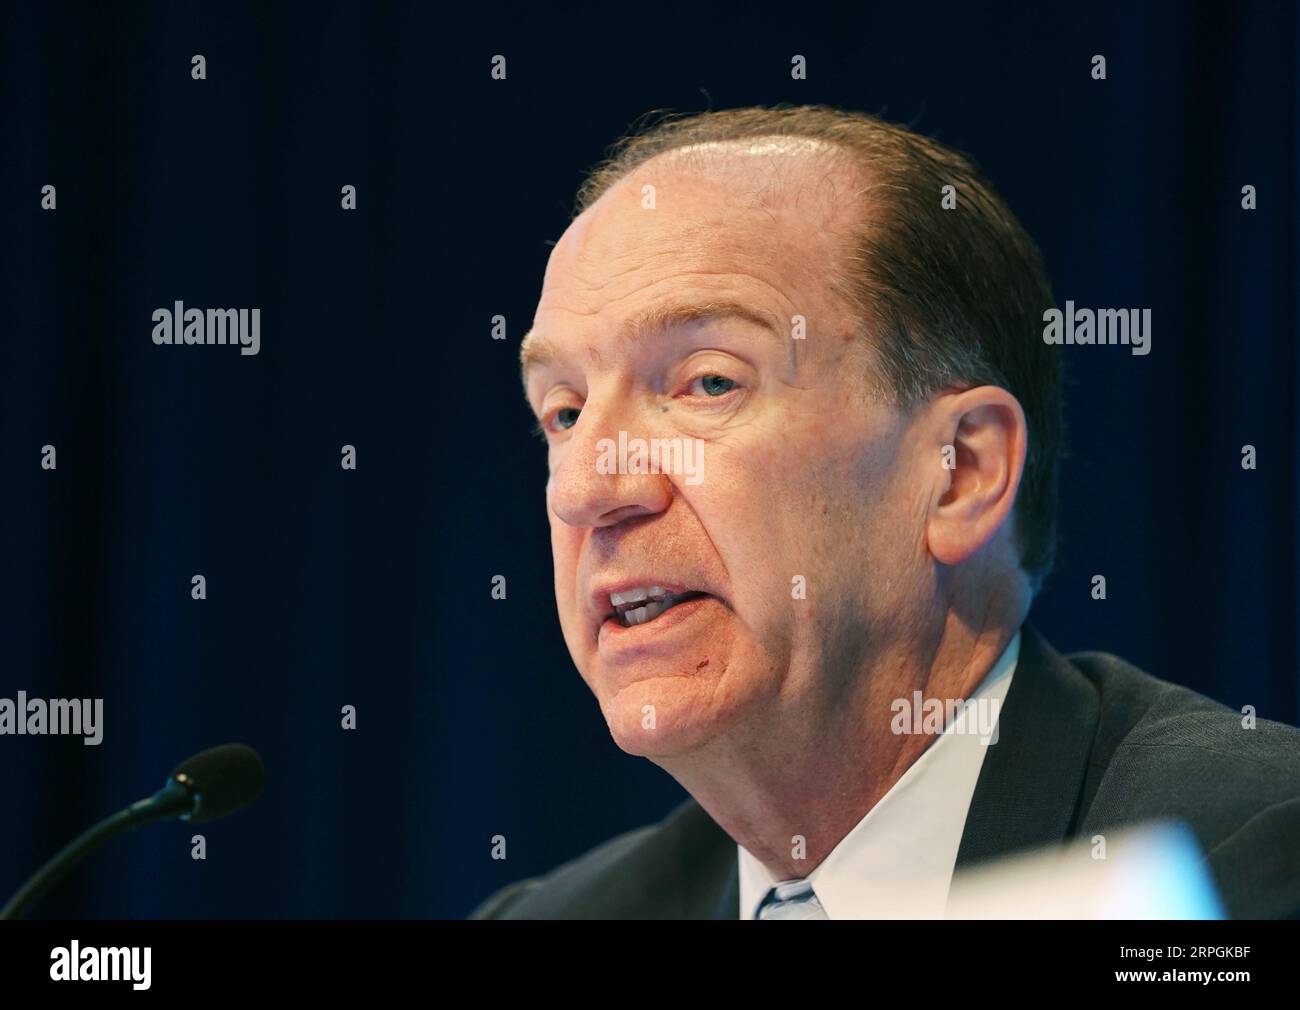 191018 -- WASHINGTON, Oct. 18, 2019 -- World Bank President David Malpass speaks during a press conference in Washington Oct. 17, 2019. Allowing market to play a bigger role in China s economy in the past few decades has led to a dramatic development that pulled hundreds of millions of people out of poverty, said the World Bank chief on Thursday, which marks the International Day for the Eradication of Poverty.  U.S.-WASHINGTON-DAVID MALPASS-WORLD BANK-PRESS CONFERENCE LiuxJie PUBLICATIONxNOTxINxCHN Stock Photo